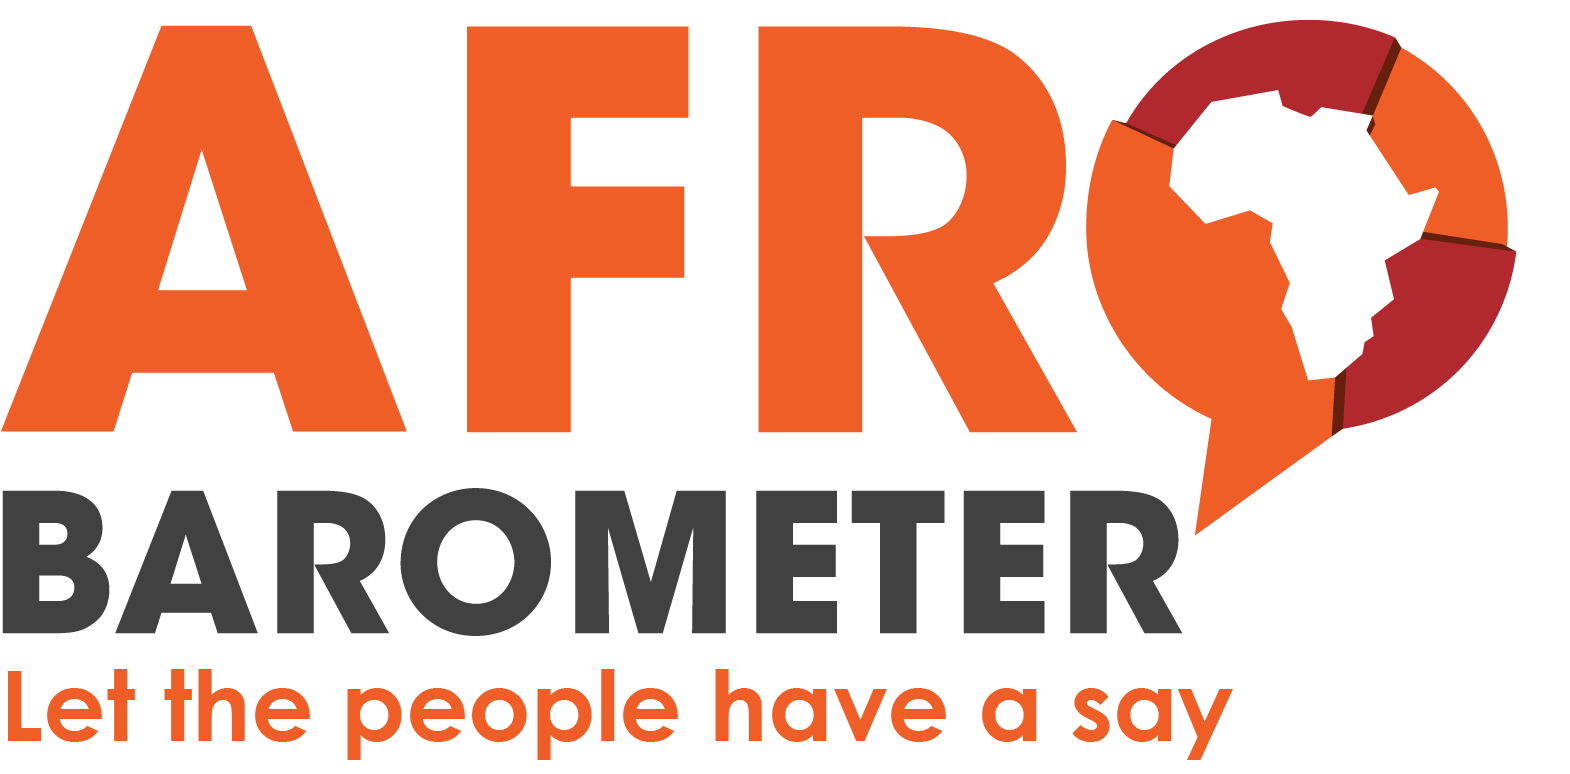 Afrobarometer receives 0,000 grant from Luminate to amplify grass-roots’ voices using data-driven insights